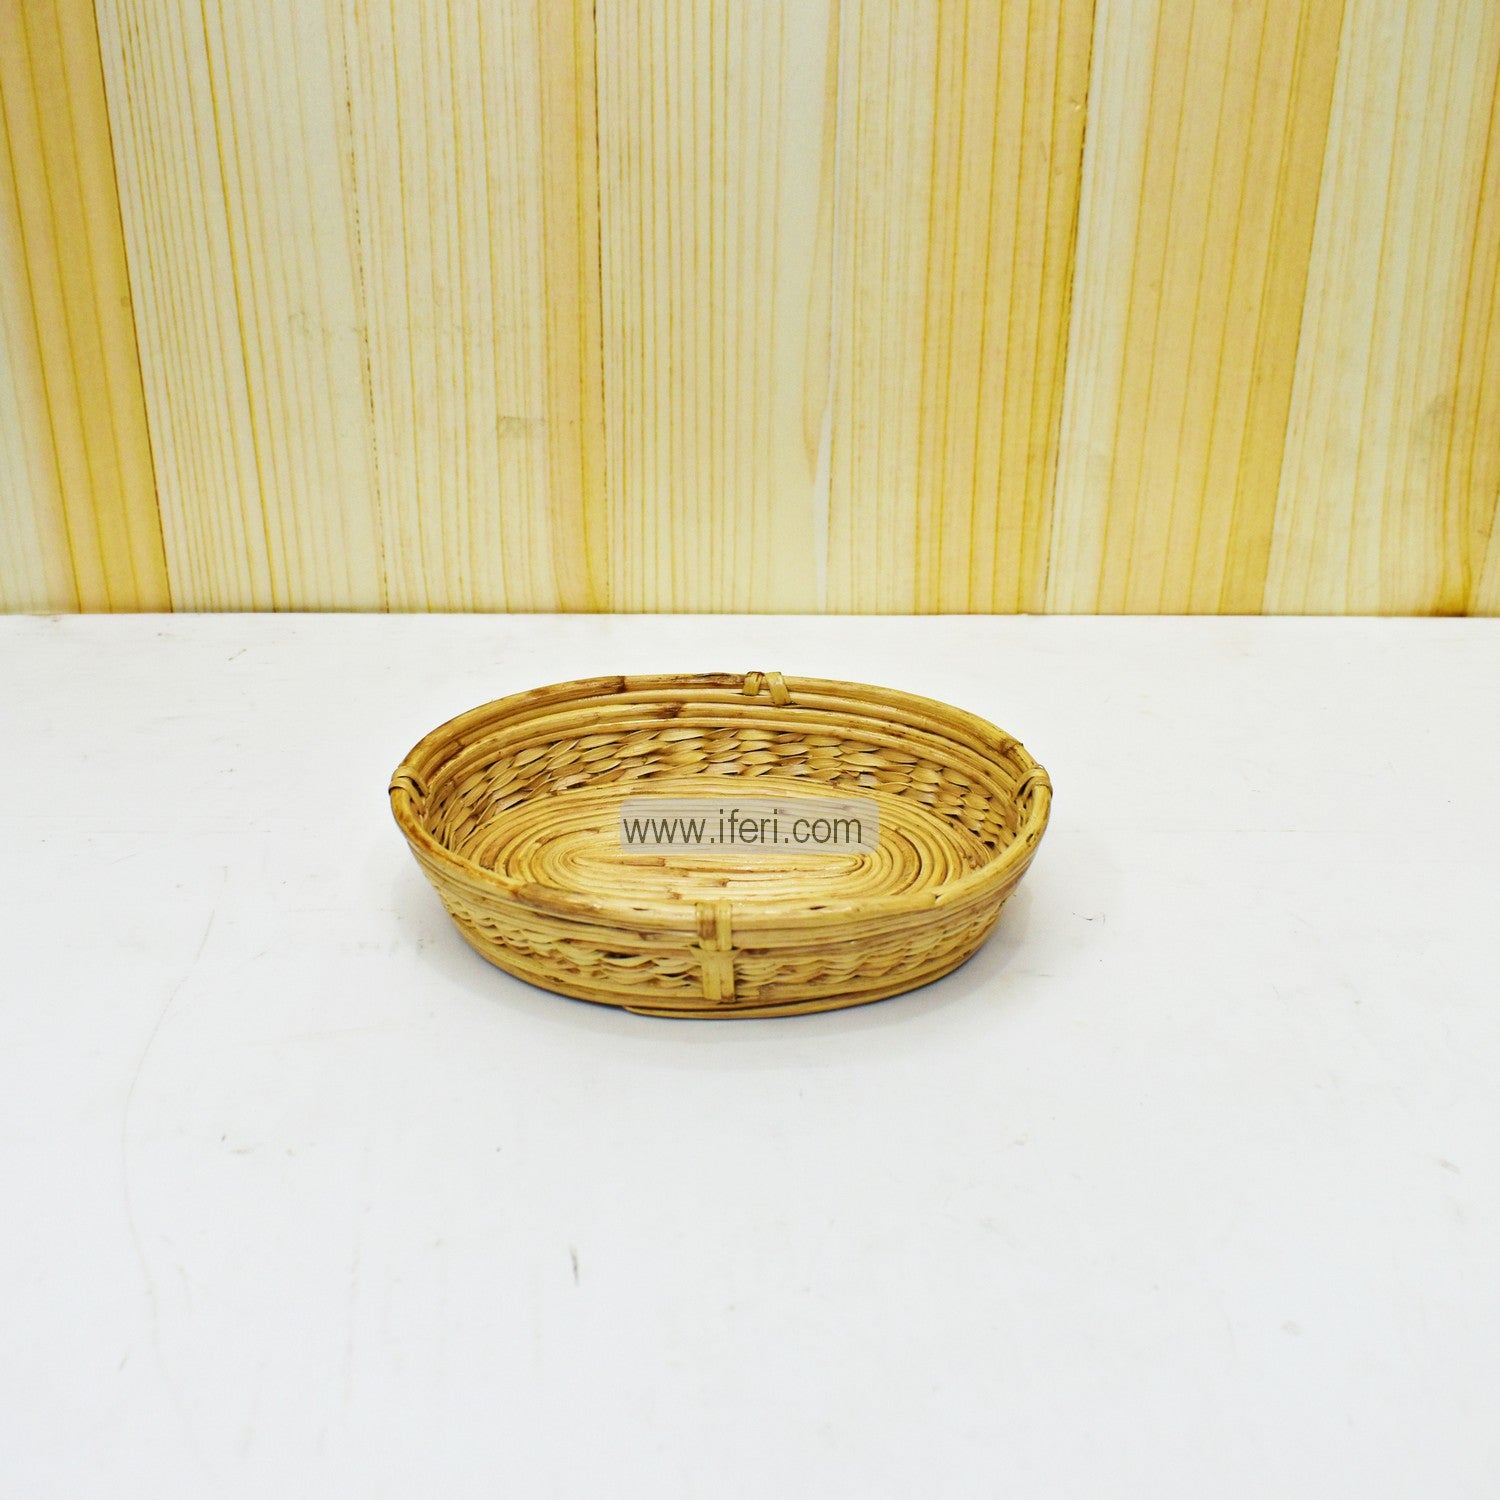 7.5 inch Oval Bread and Roti Basket for Kitchen and Dining Serving ALF0987